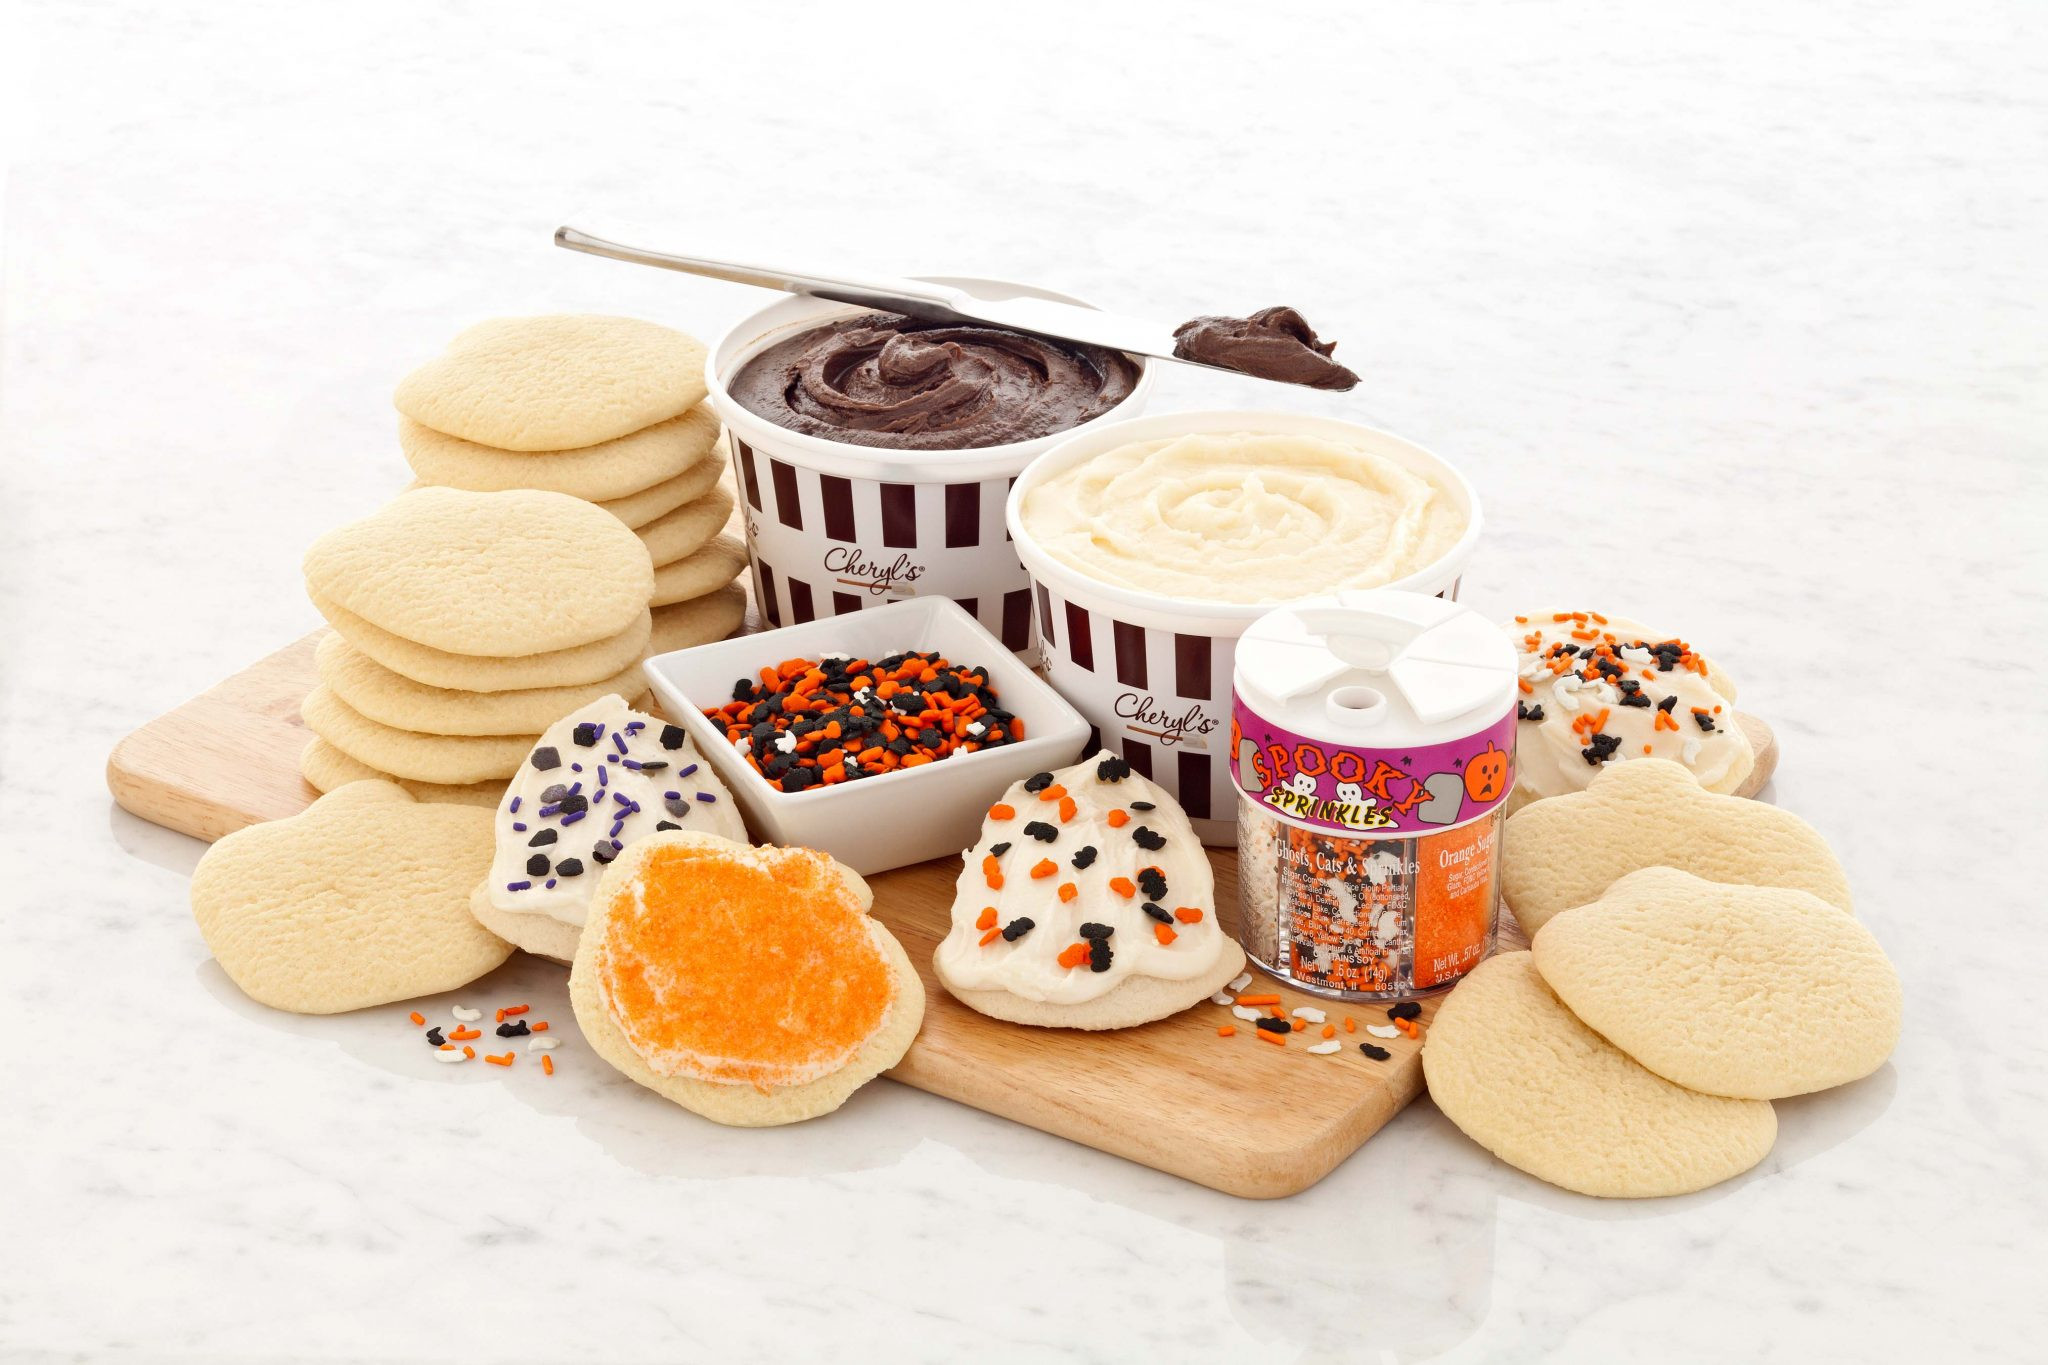 Halloween Cut Out Cookies
 Win a Halloween Cookie Decorating Kit from Cheryl s Cookies